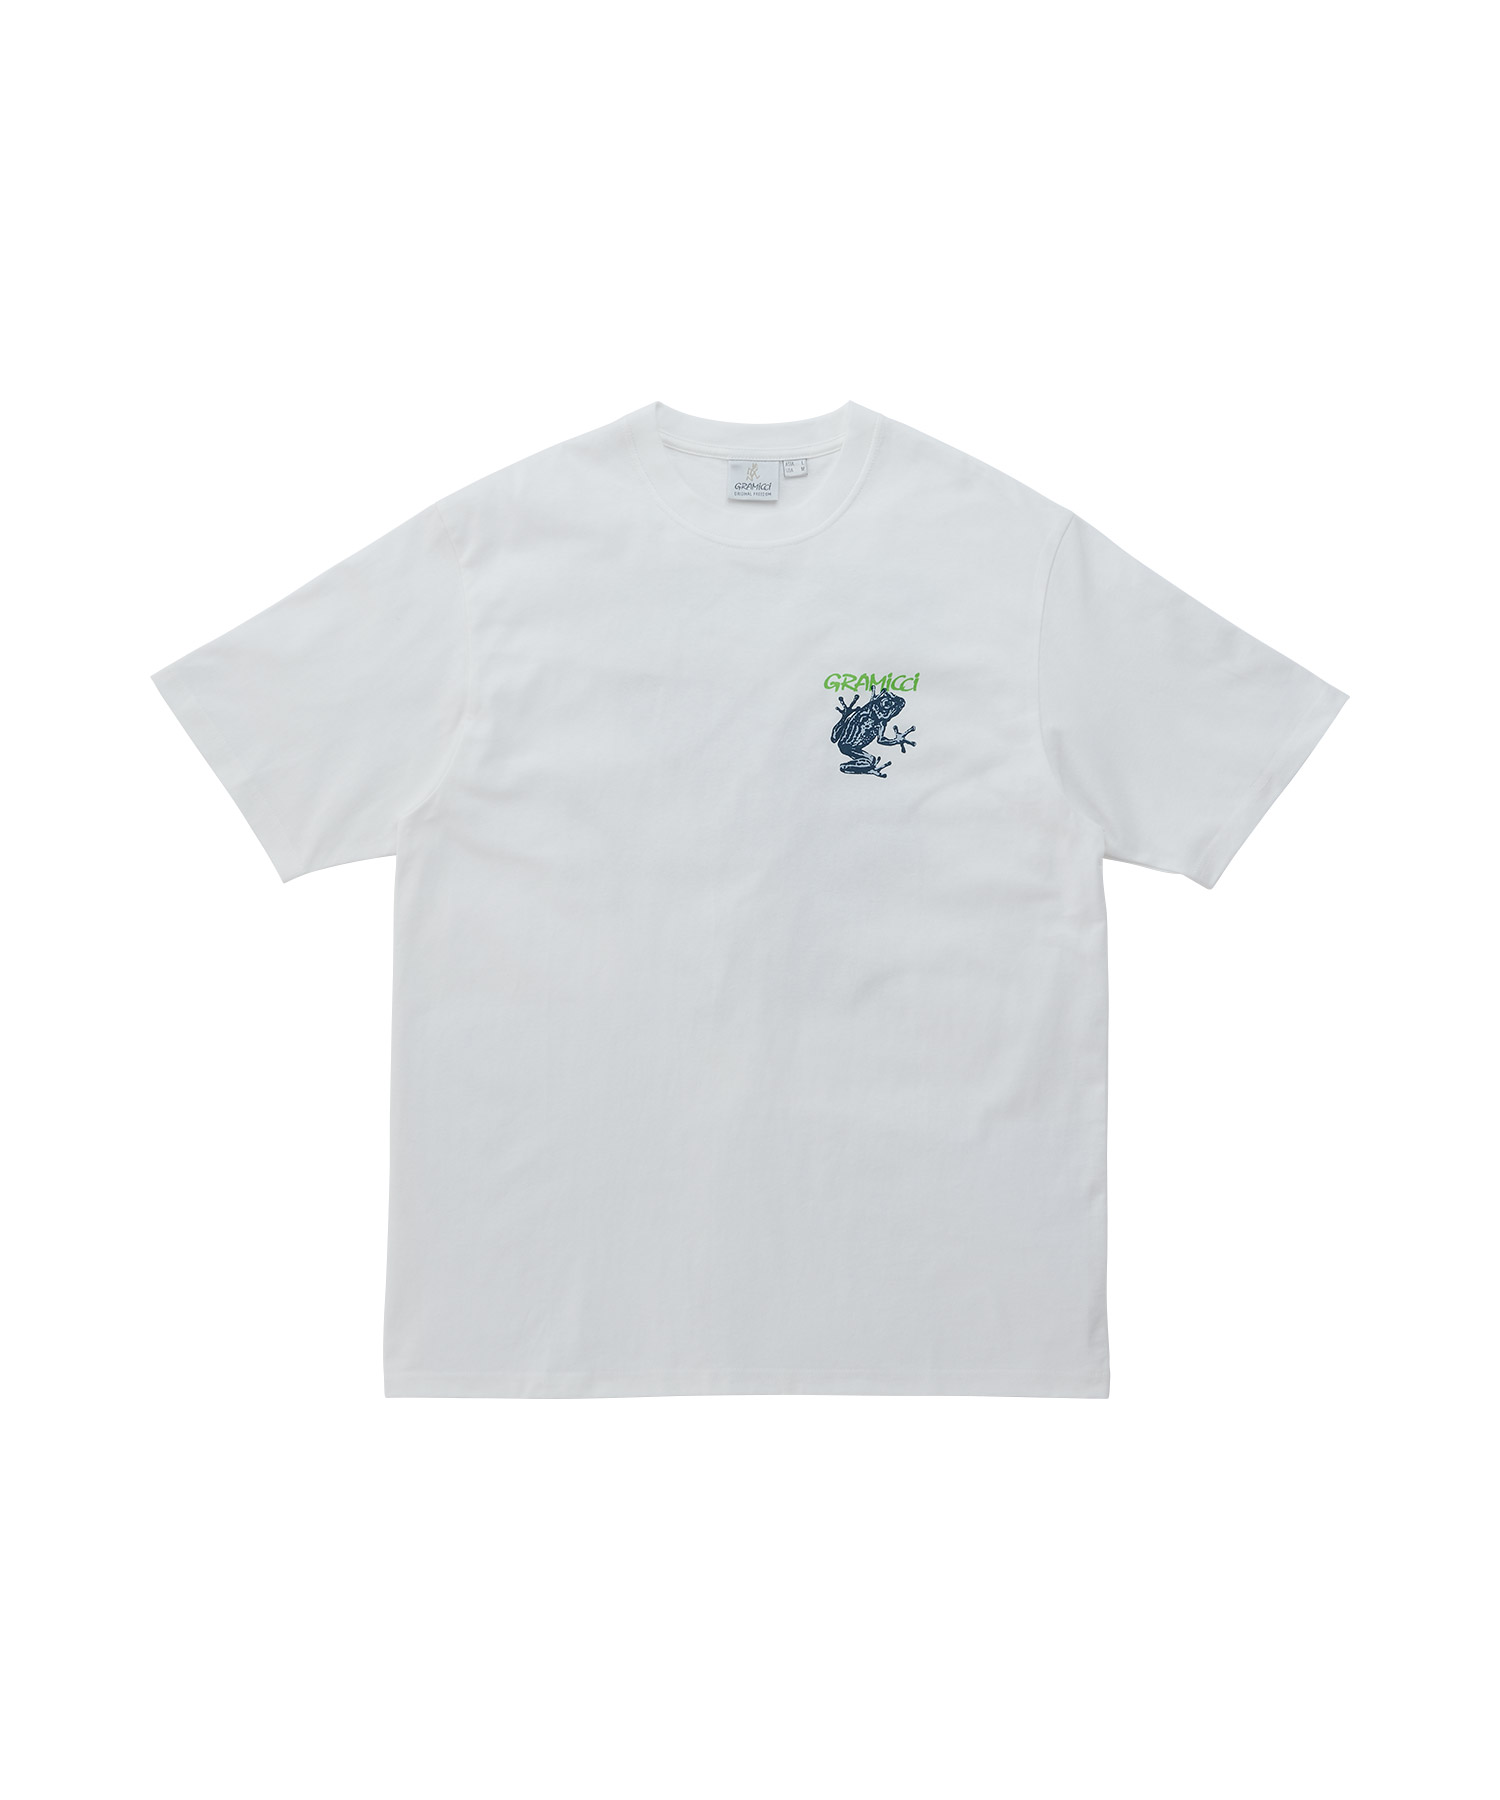 Gramicci Sticky Frog Tee White